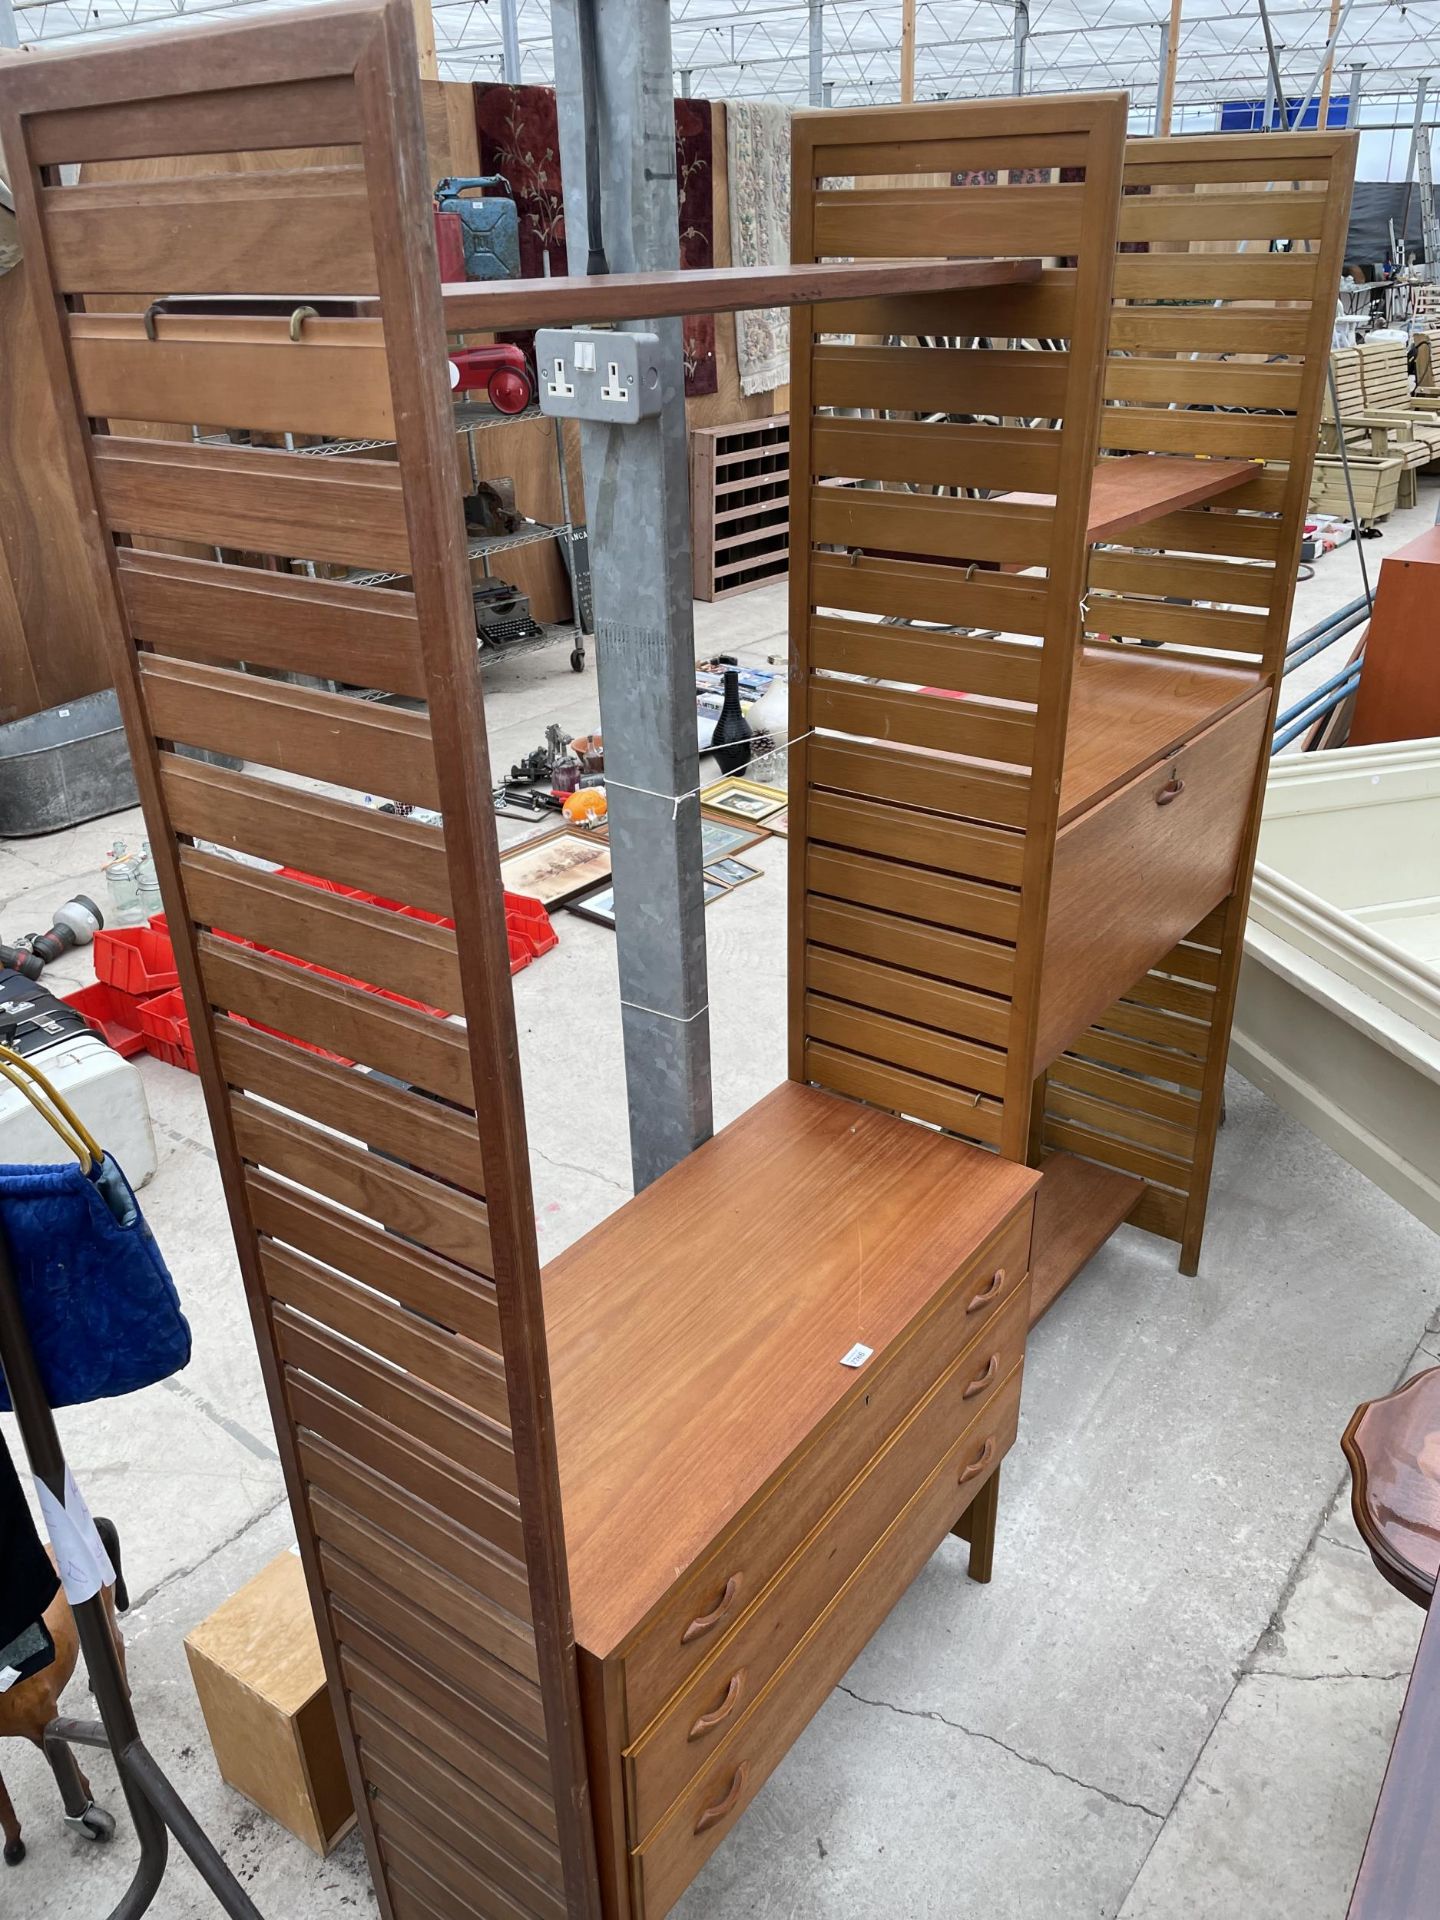 STAPLES LADDERAX TWO DIVISION RETRO TEAK WALL UNITS, 36" WIDE EACH - Image 4 of 4